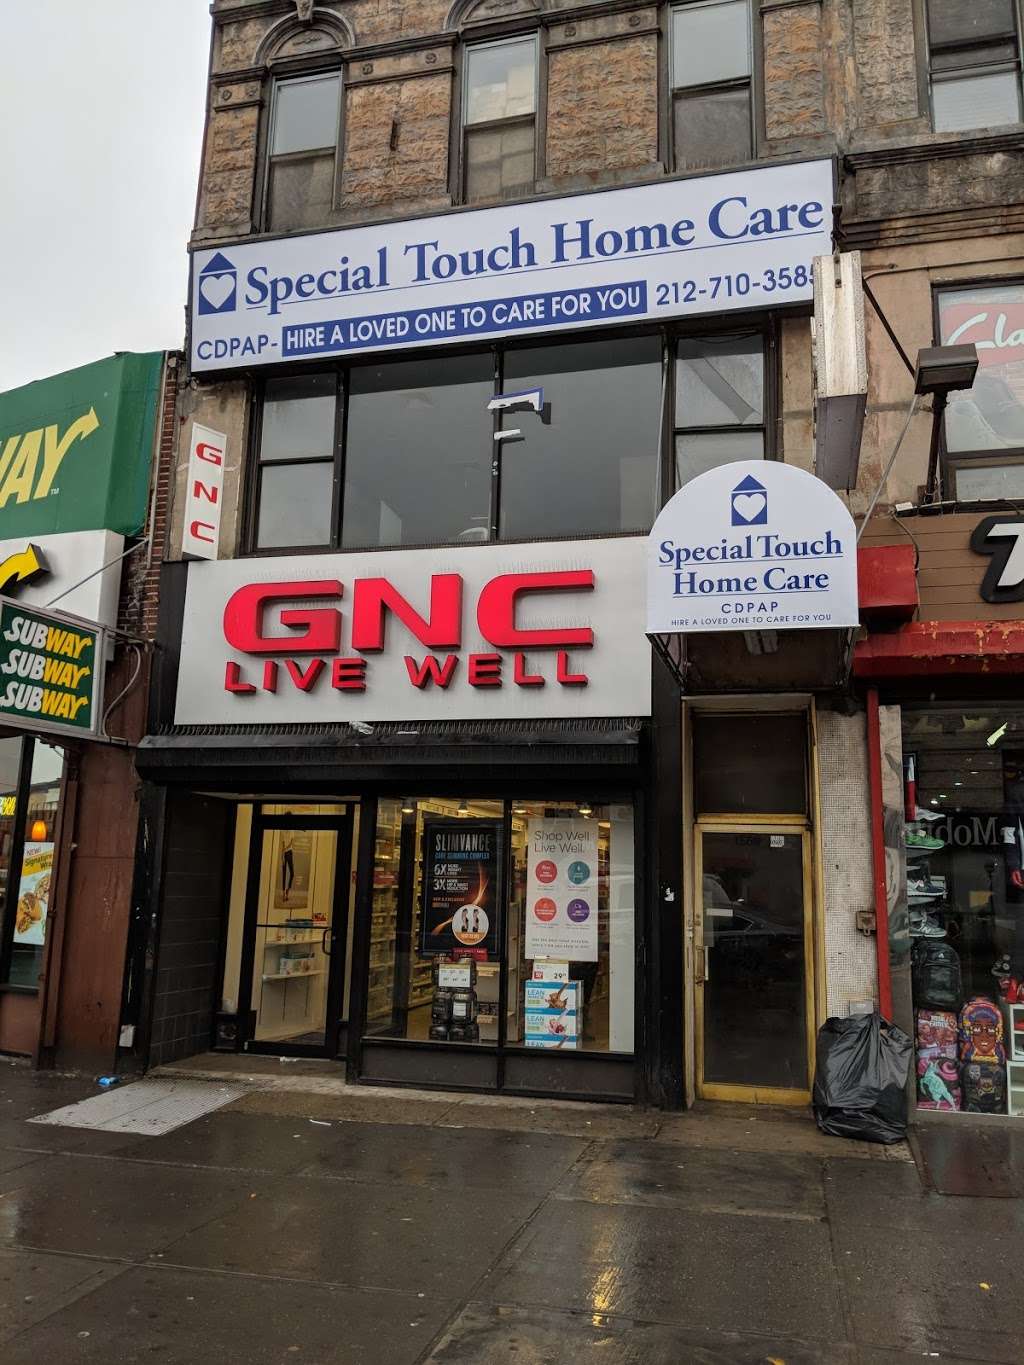 Special Touch Home Care - CDPAP and HHA Services - Brooklyn (Fla | 1569 Flatbush Ave 2nd floor, Brooklyn, NY 11210, USA | Phone: (212) 710-3585